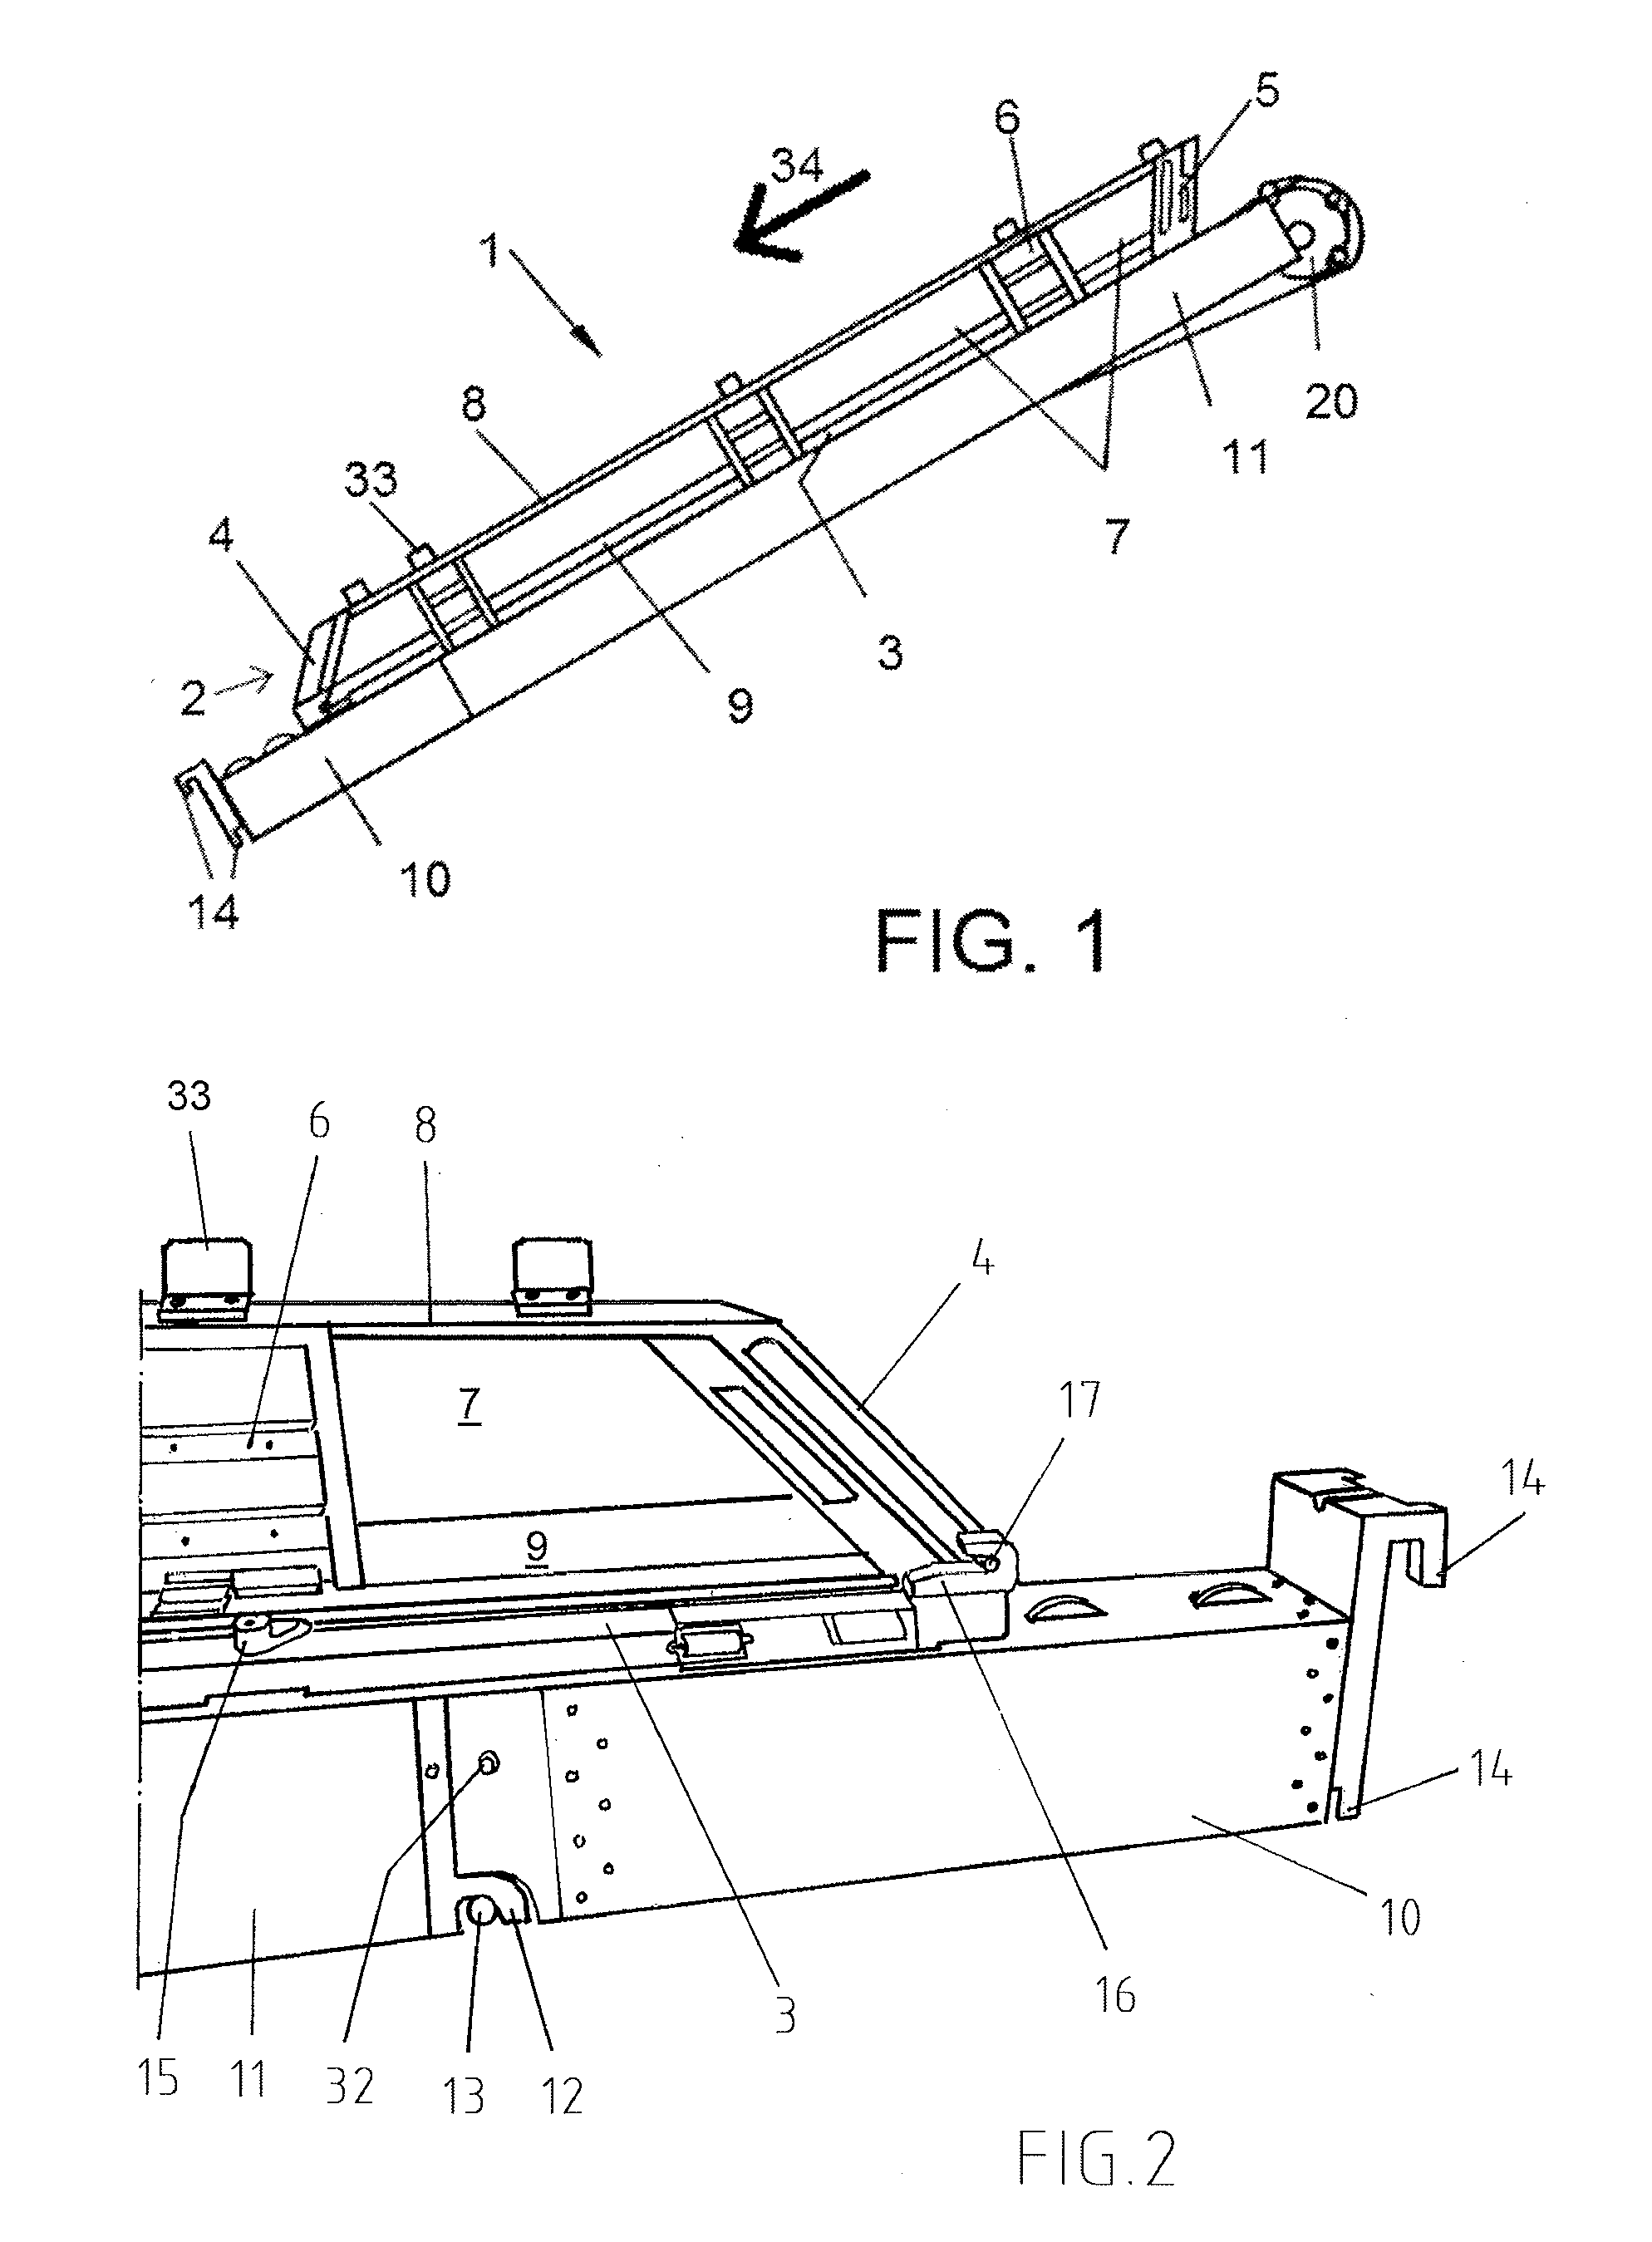 Immersion device for an optical fiber for measuring the temperature of a melt